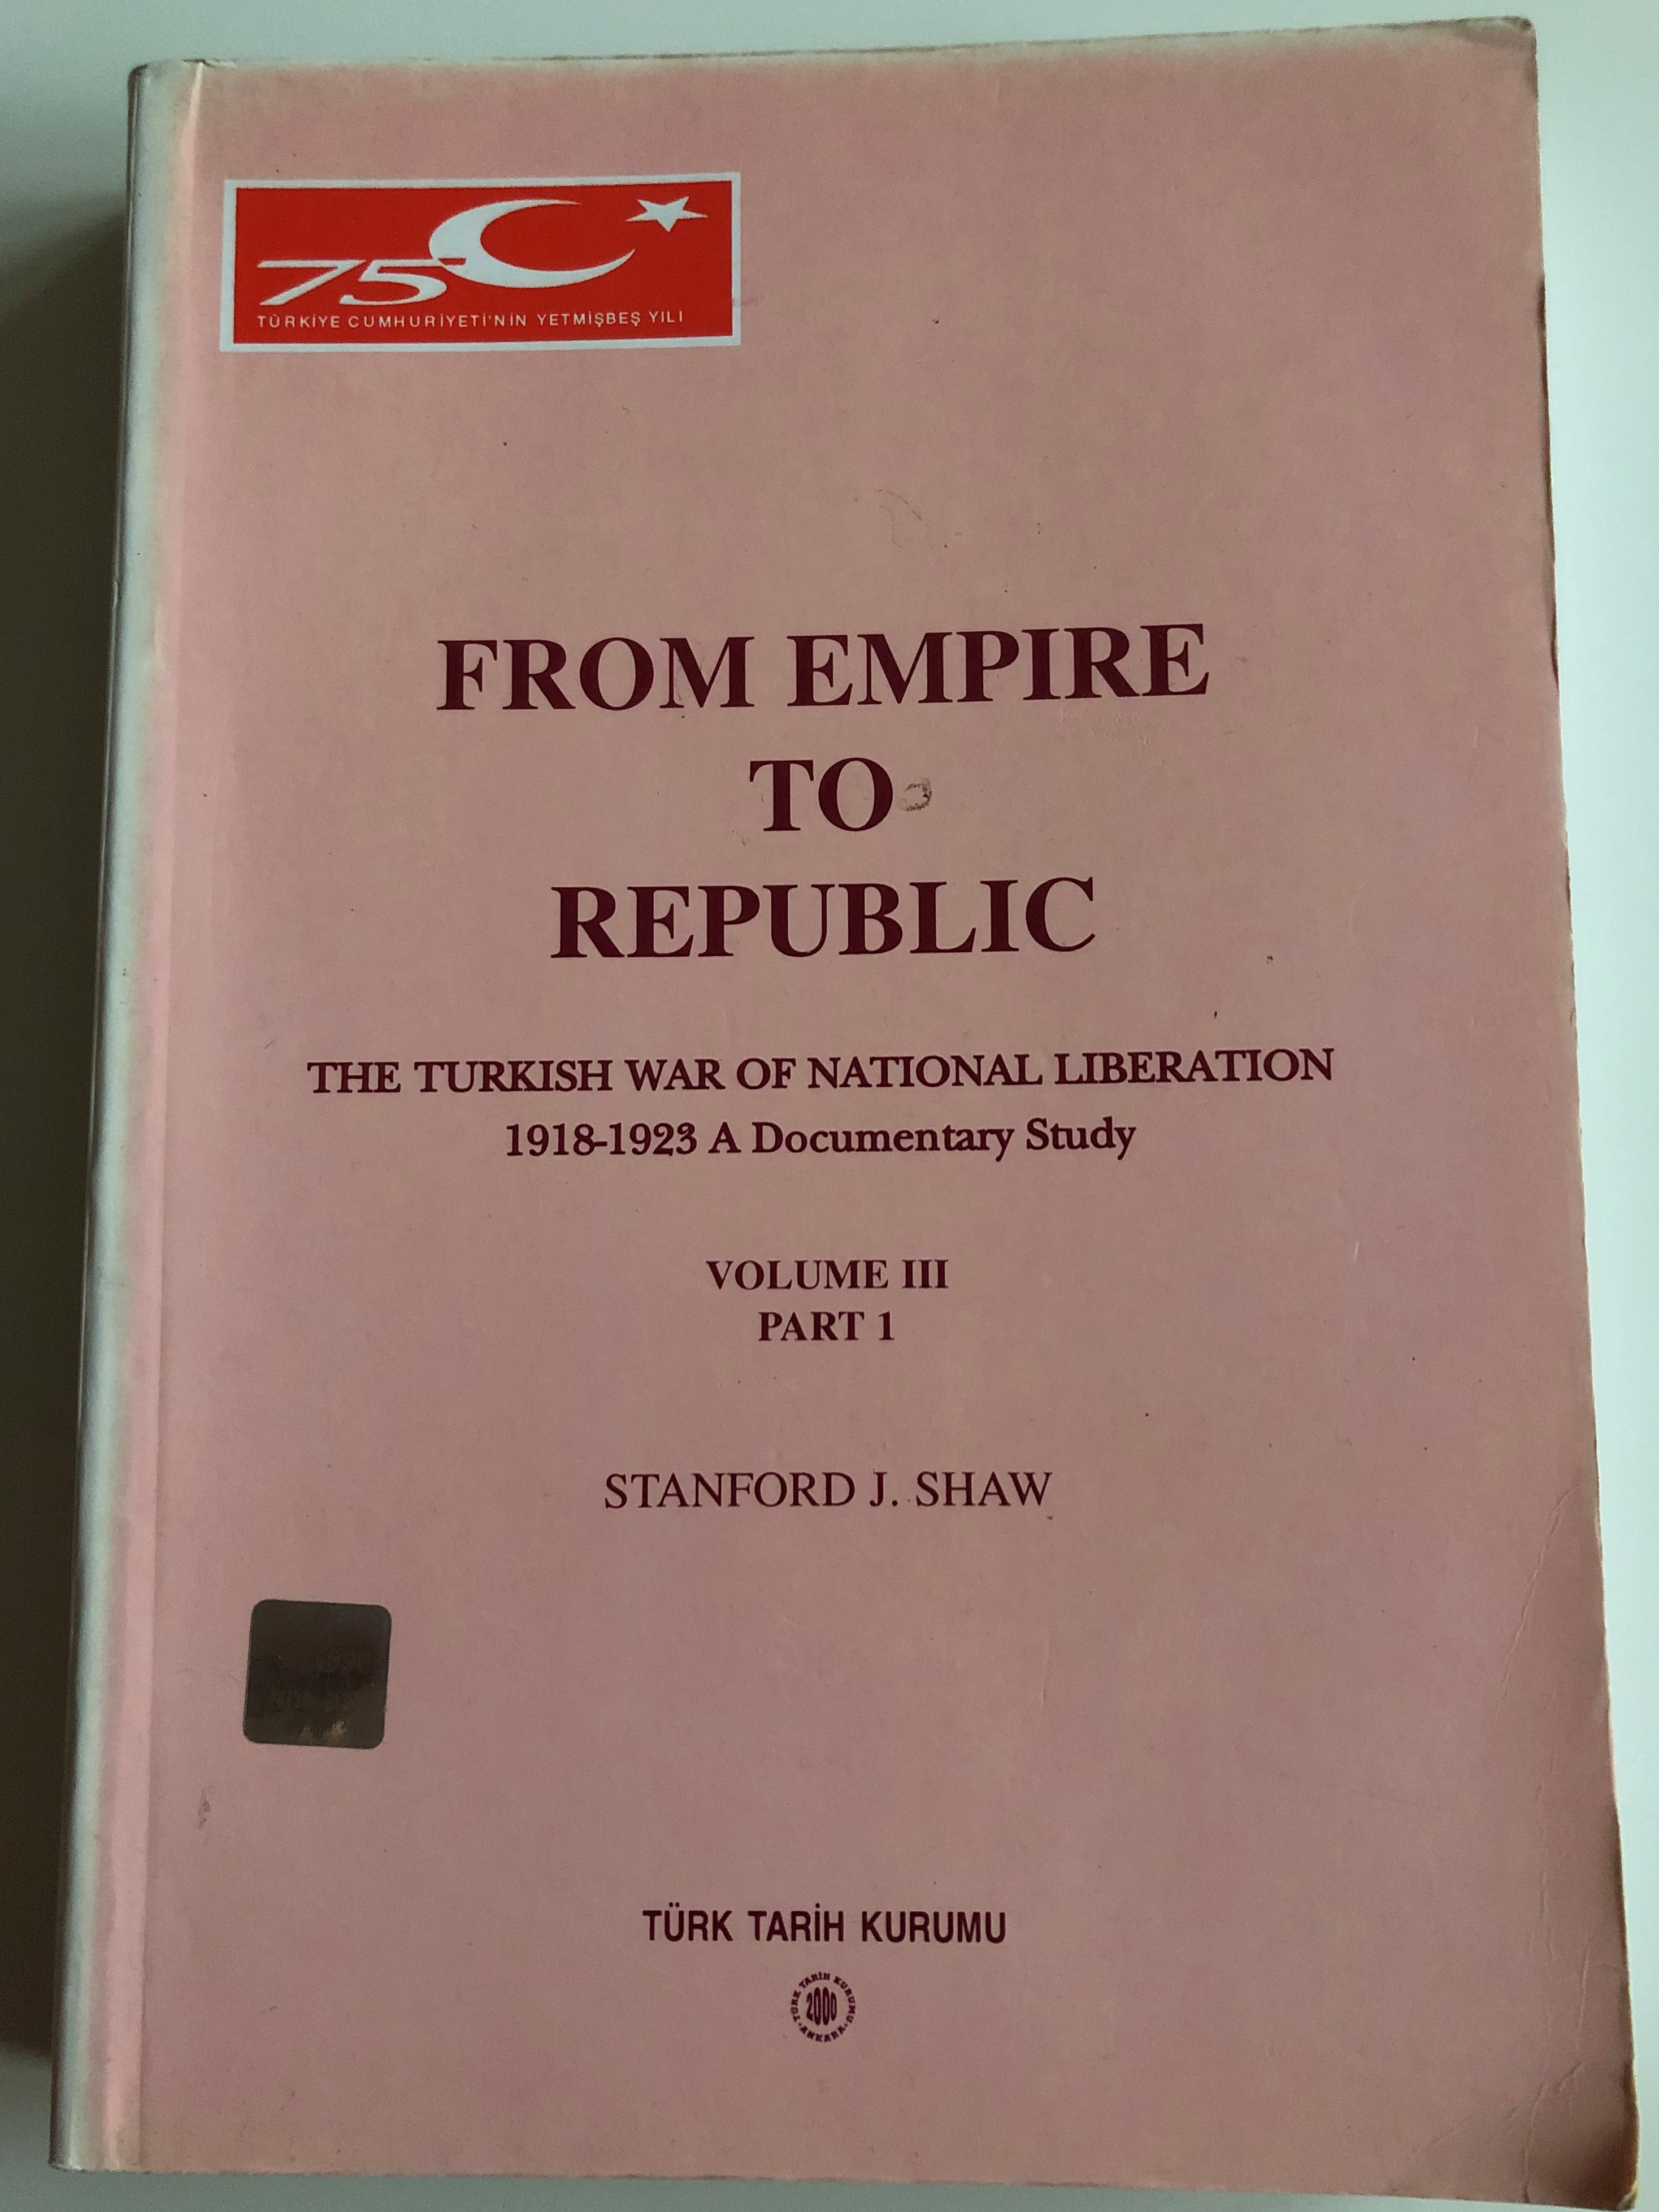 from-empire-to-republic-the-turkish-war-of-national-liberation-by-stanford-j.-shaw-1-.jpg